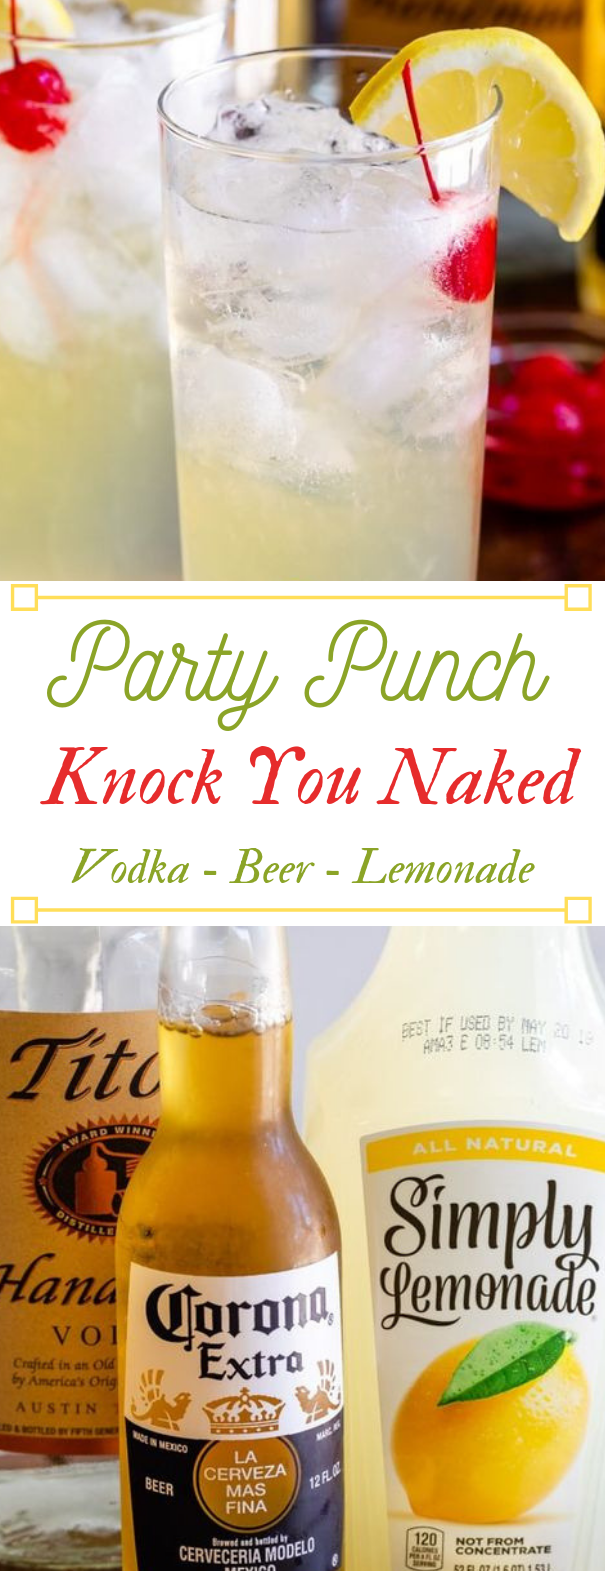 KNOCK YOU NAKED PARTY PUNCH #drink #punch #party #lemonade #sangria